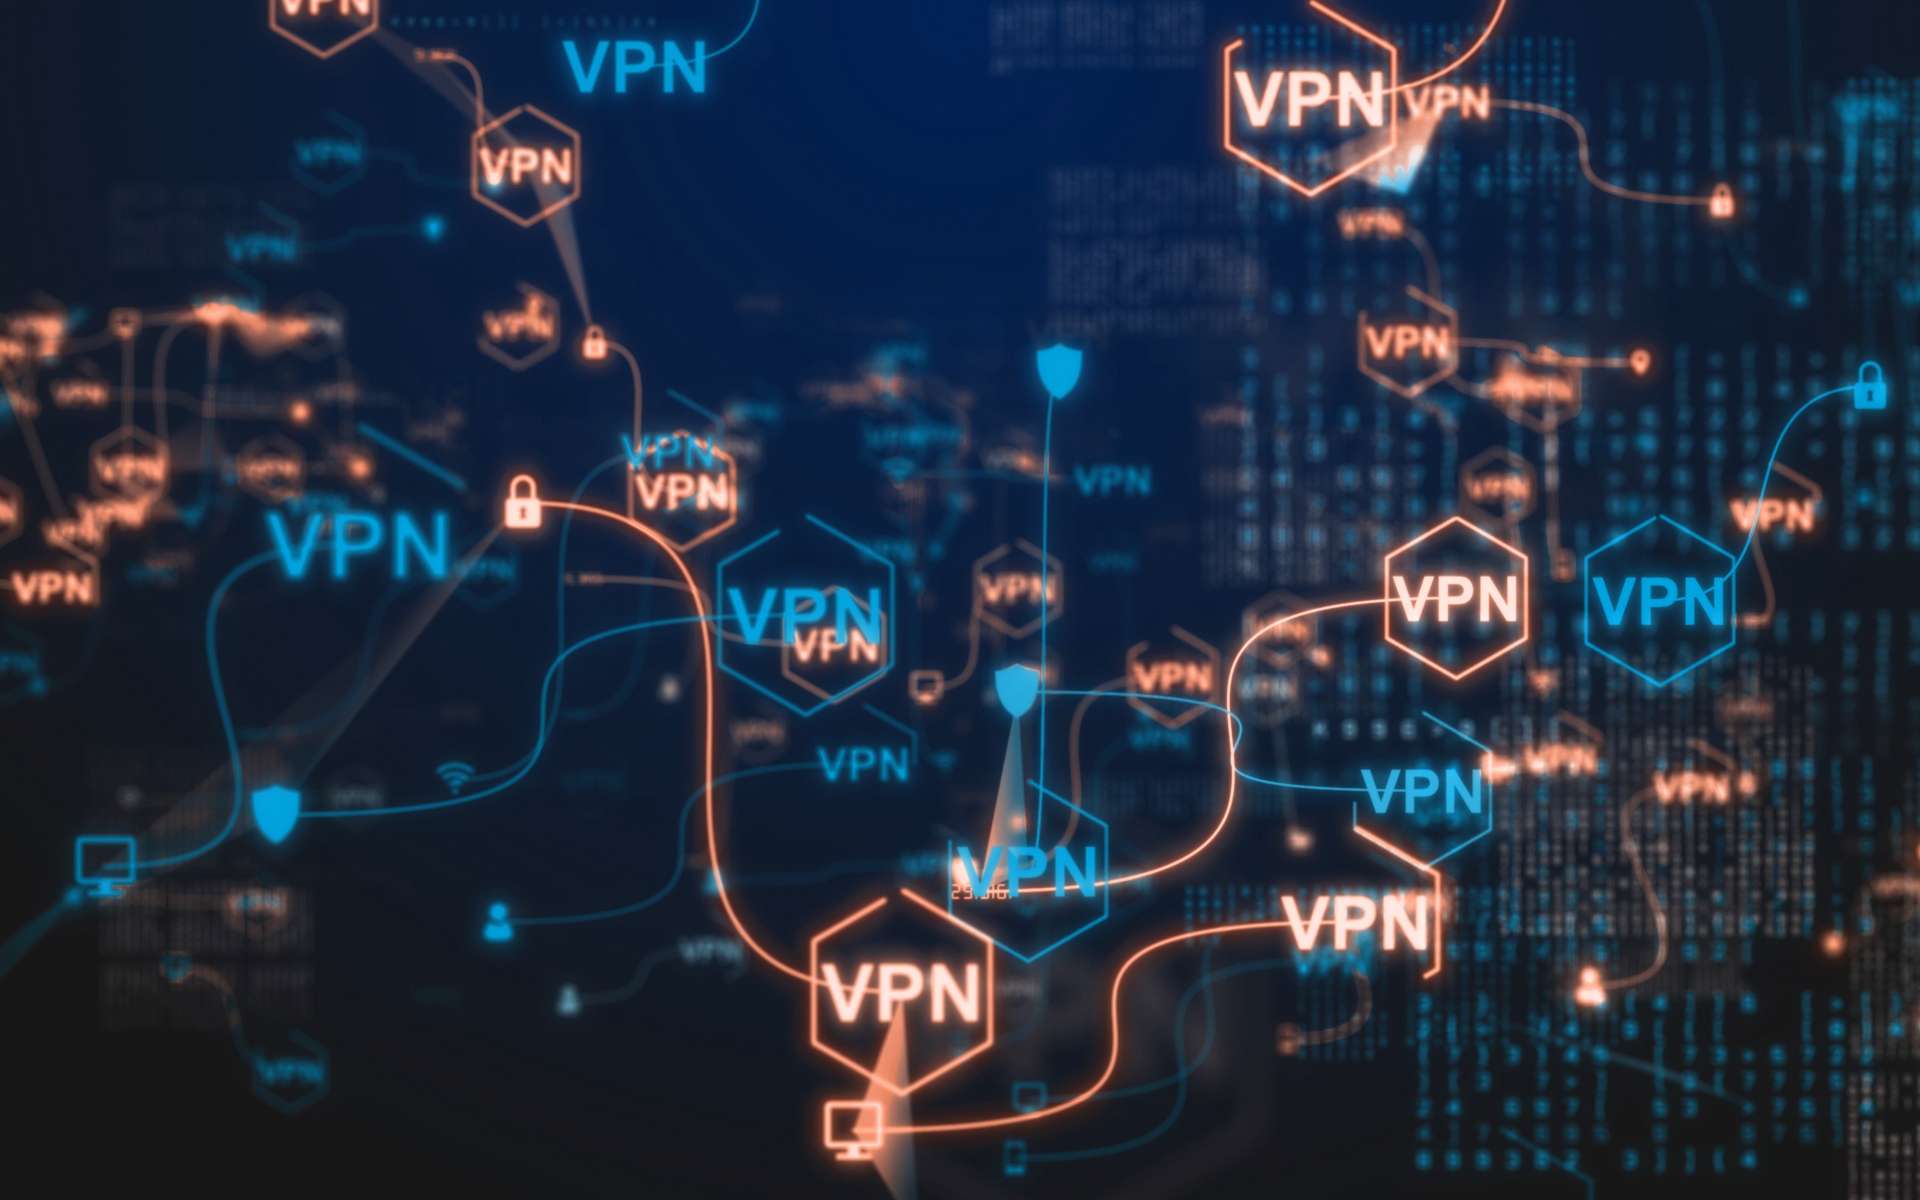 How do I set up a VPN on iPhone?